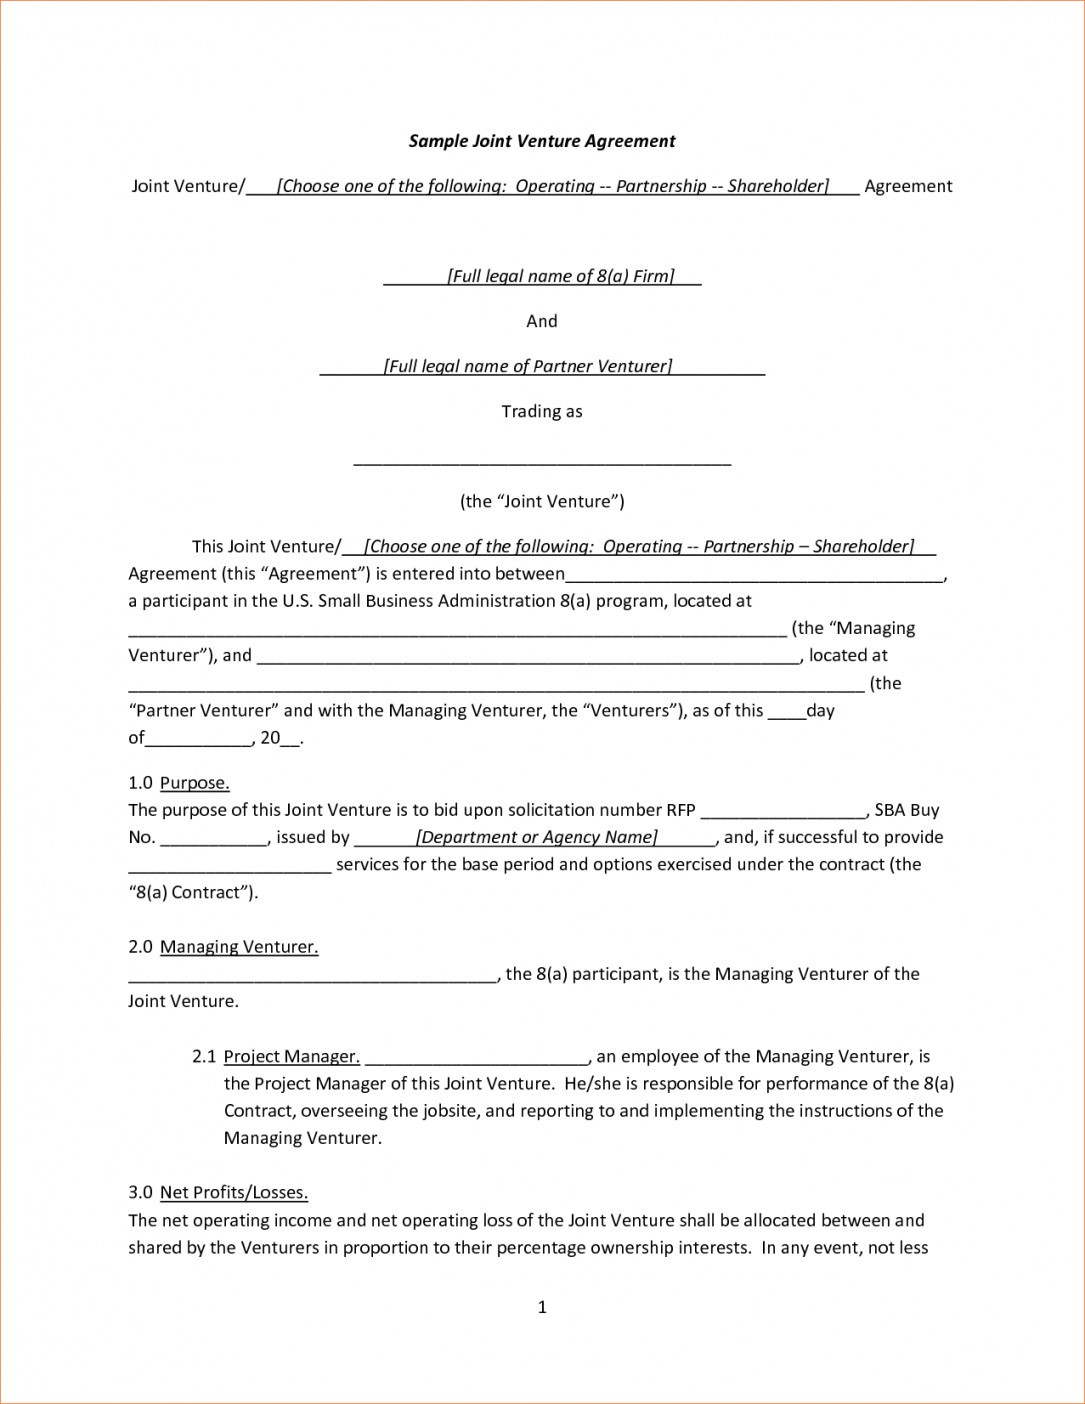 Joint Venture Agreement Template Word Lostranquillos Document